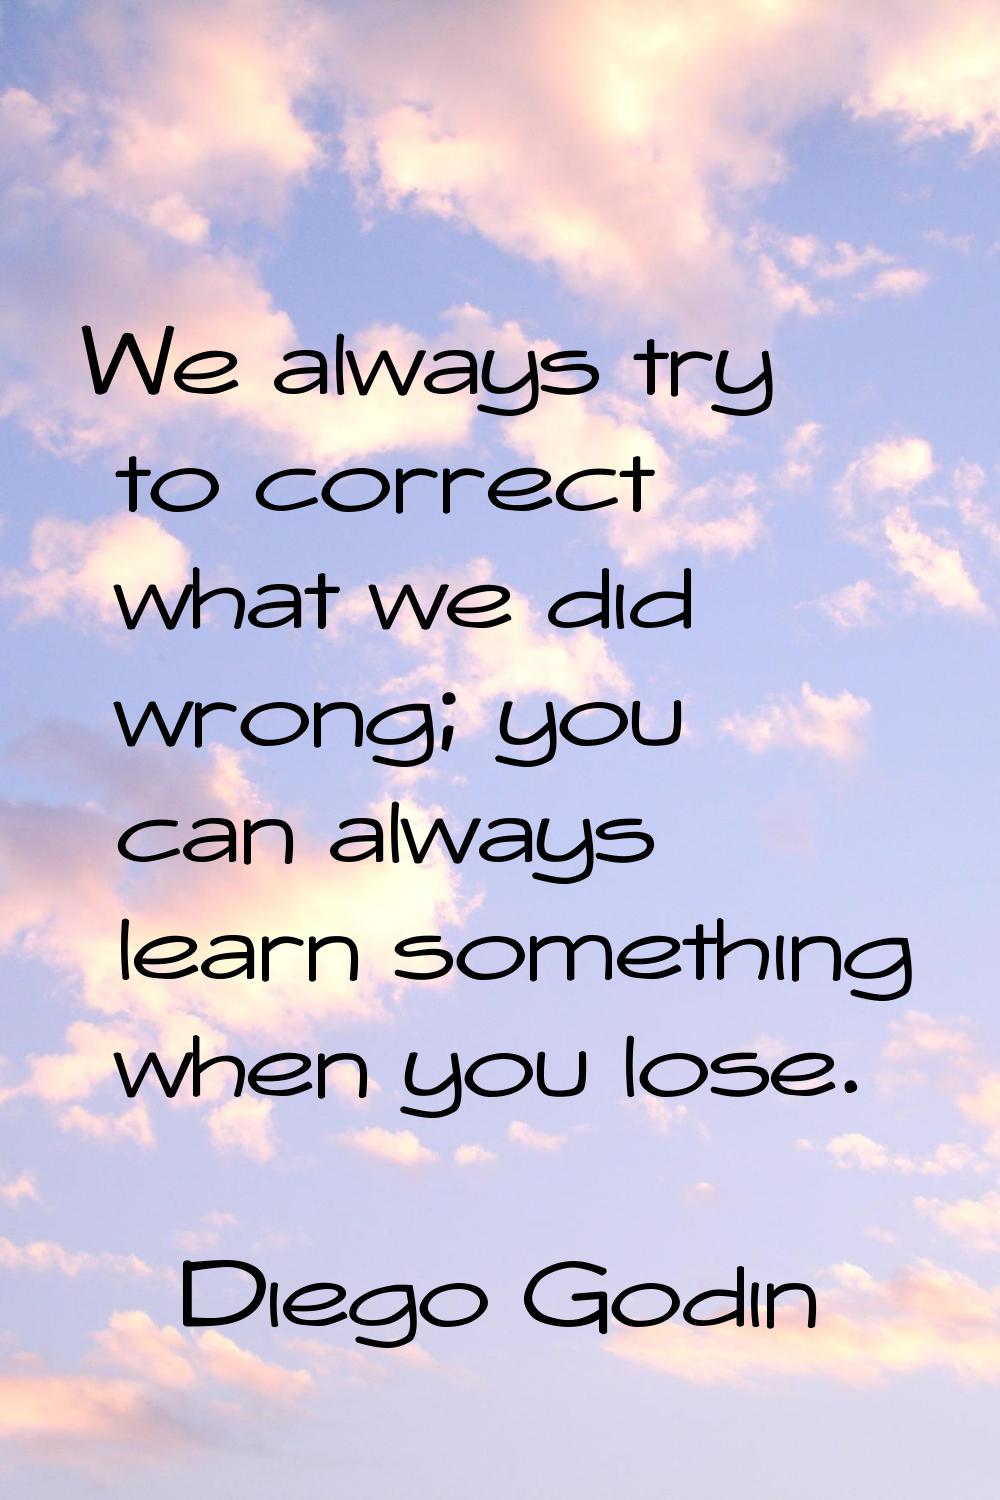 We always try to correct what we did wrong; you can always learn something when you lose.